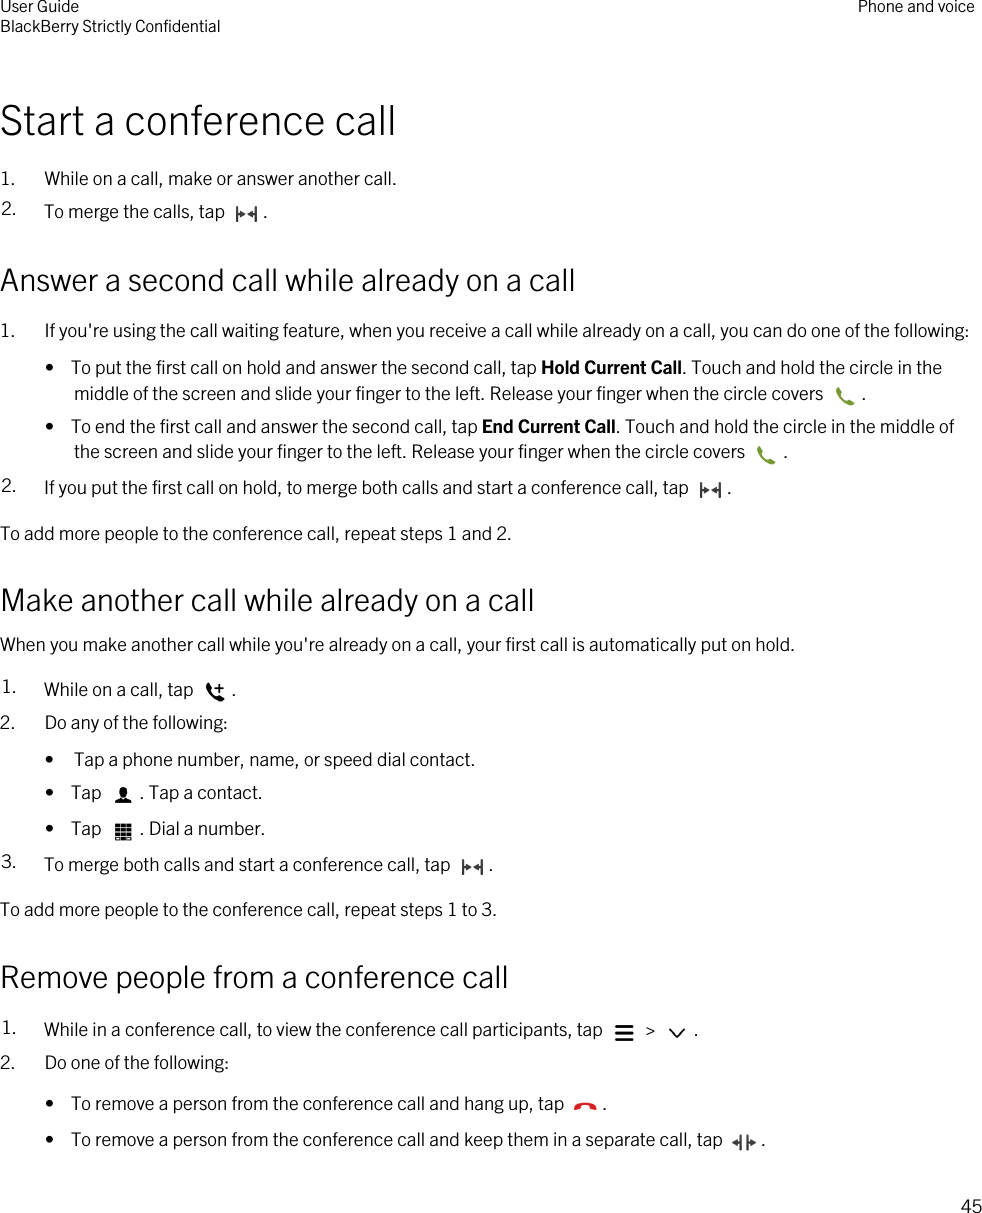 Start a conference call1. While on a call, make or answer another call.2. To merge the calls, tap  .Answer a second call while already on a call1. If you&apos;re using the call waiting feature, when you receive a call while already on a call, you can do one of the following:•  To put the first call on hold and answer the second call, tap Hold Current Call. Touch and hold the circle in the middle of the screen and slide your finger to the left. Release your finger when the circle covers  .•  To end the first call and answer the second call, tap End Current Call. Touch and hold the circle in the middle of the screen and slide your finger to the left. Release your finger when the circle covers  .2. If you put the first call on hold, to merge both calls and start a conference call, tap  .To add more people to the conference call, repeat steps 1 and 2.Make another call while already on a callWhen you make another call while you&apos;re already on a call, your first call is automatically put on hold.1. While on a call, tap  .2. Do any of the following:• Tap a phone number, name, or speed dial contact.•  Tap  . Tap a contact.•  Tap  . Dial a number.3. To merge both calls and start a conference call, tap  .To add more people to the conference call, repeat steps 1 to 3.Remove people from a conference call1. While in a conference call, to view the conference call participants, tap   &gt;  . 2. Do one of the following:•  To remove a person from the conference call and hang up, tap  .•  To remove a person from the conference call and keep them in a separate call, tap  .User GuideBlackBerry Strictly Confidential Phone and voice45